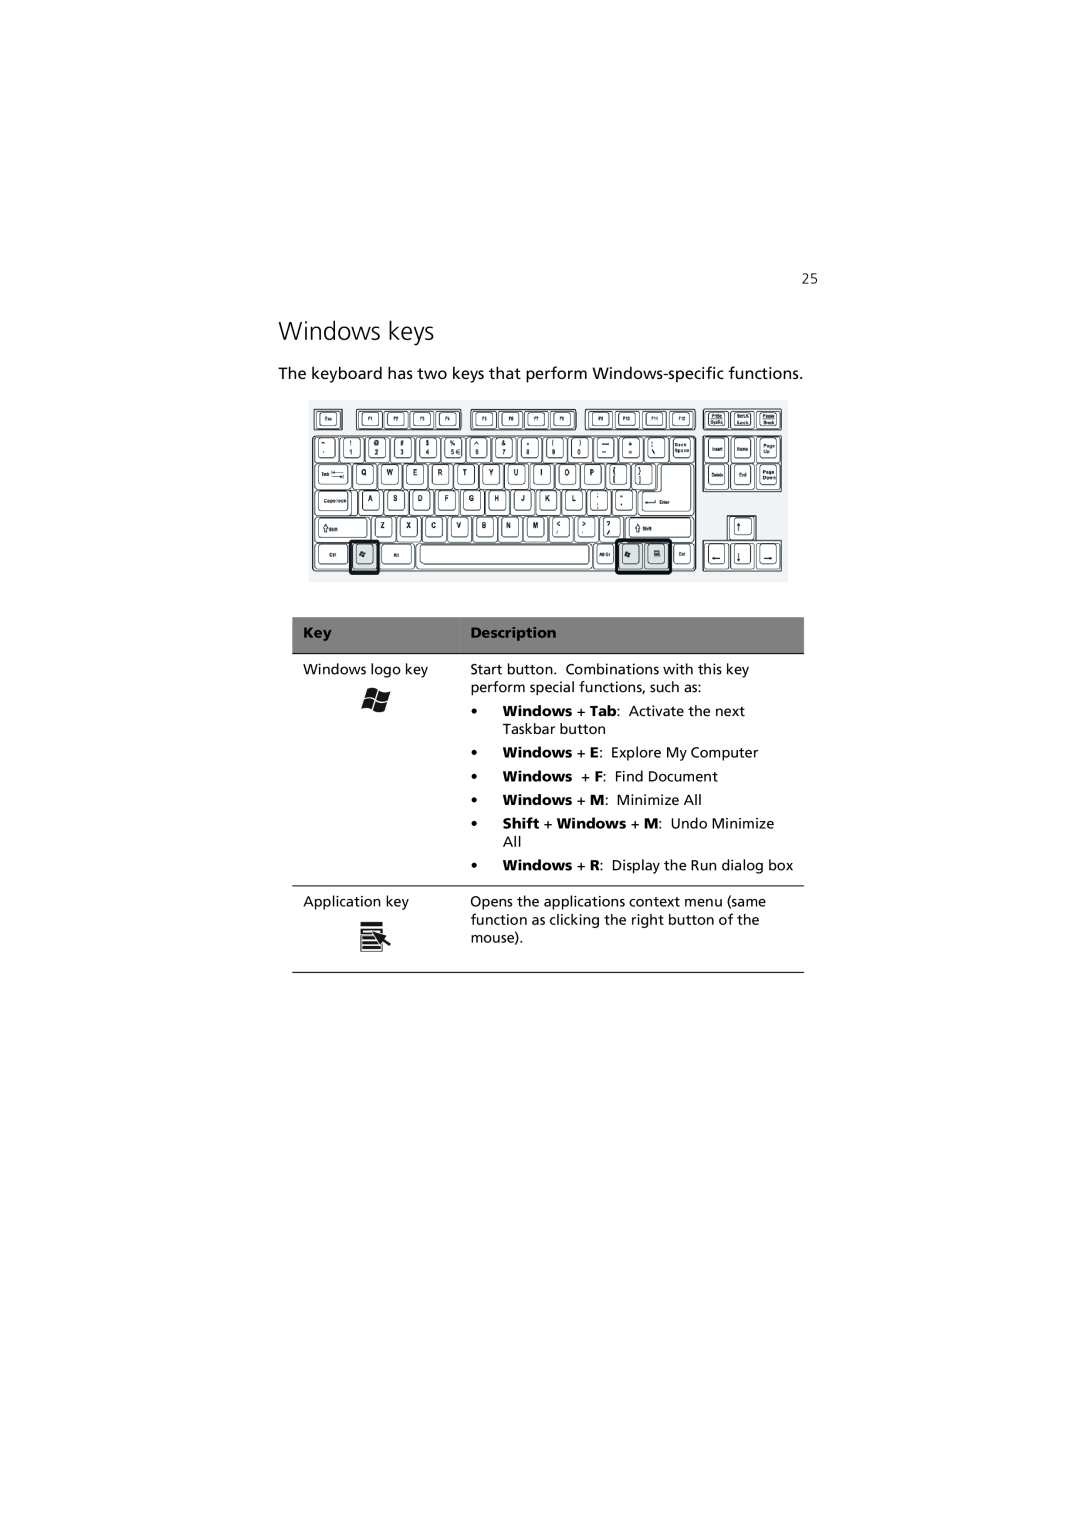 Acer 7600 manual Windows keys, The keyboard has two keys that perform Windows-specific functions 